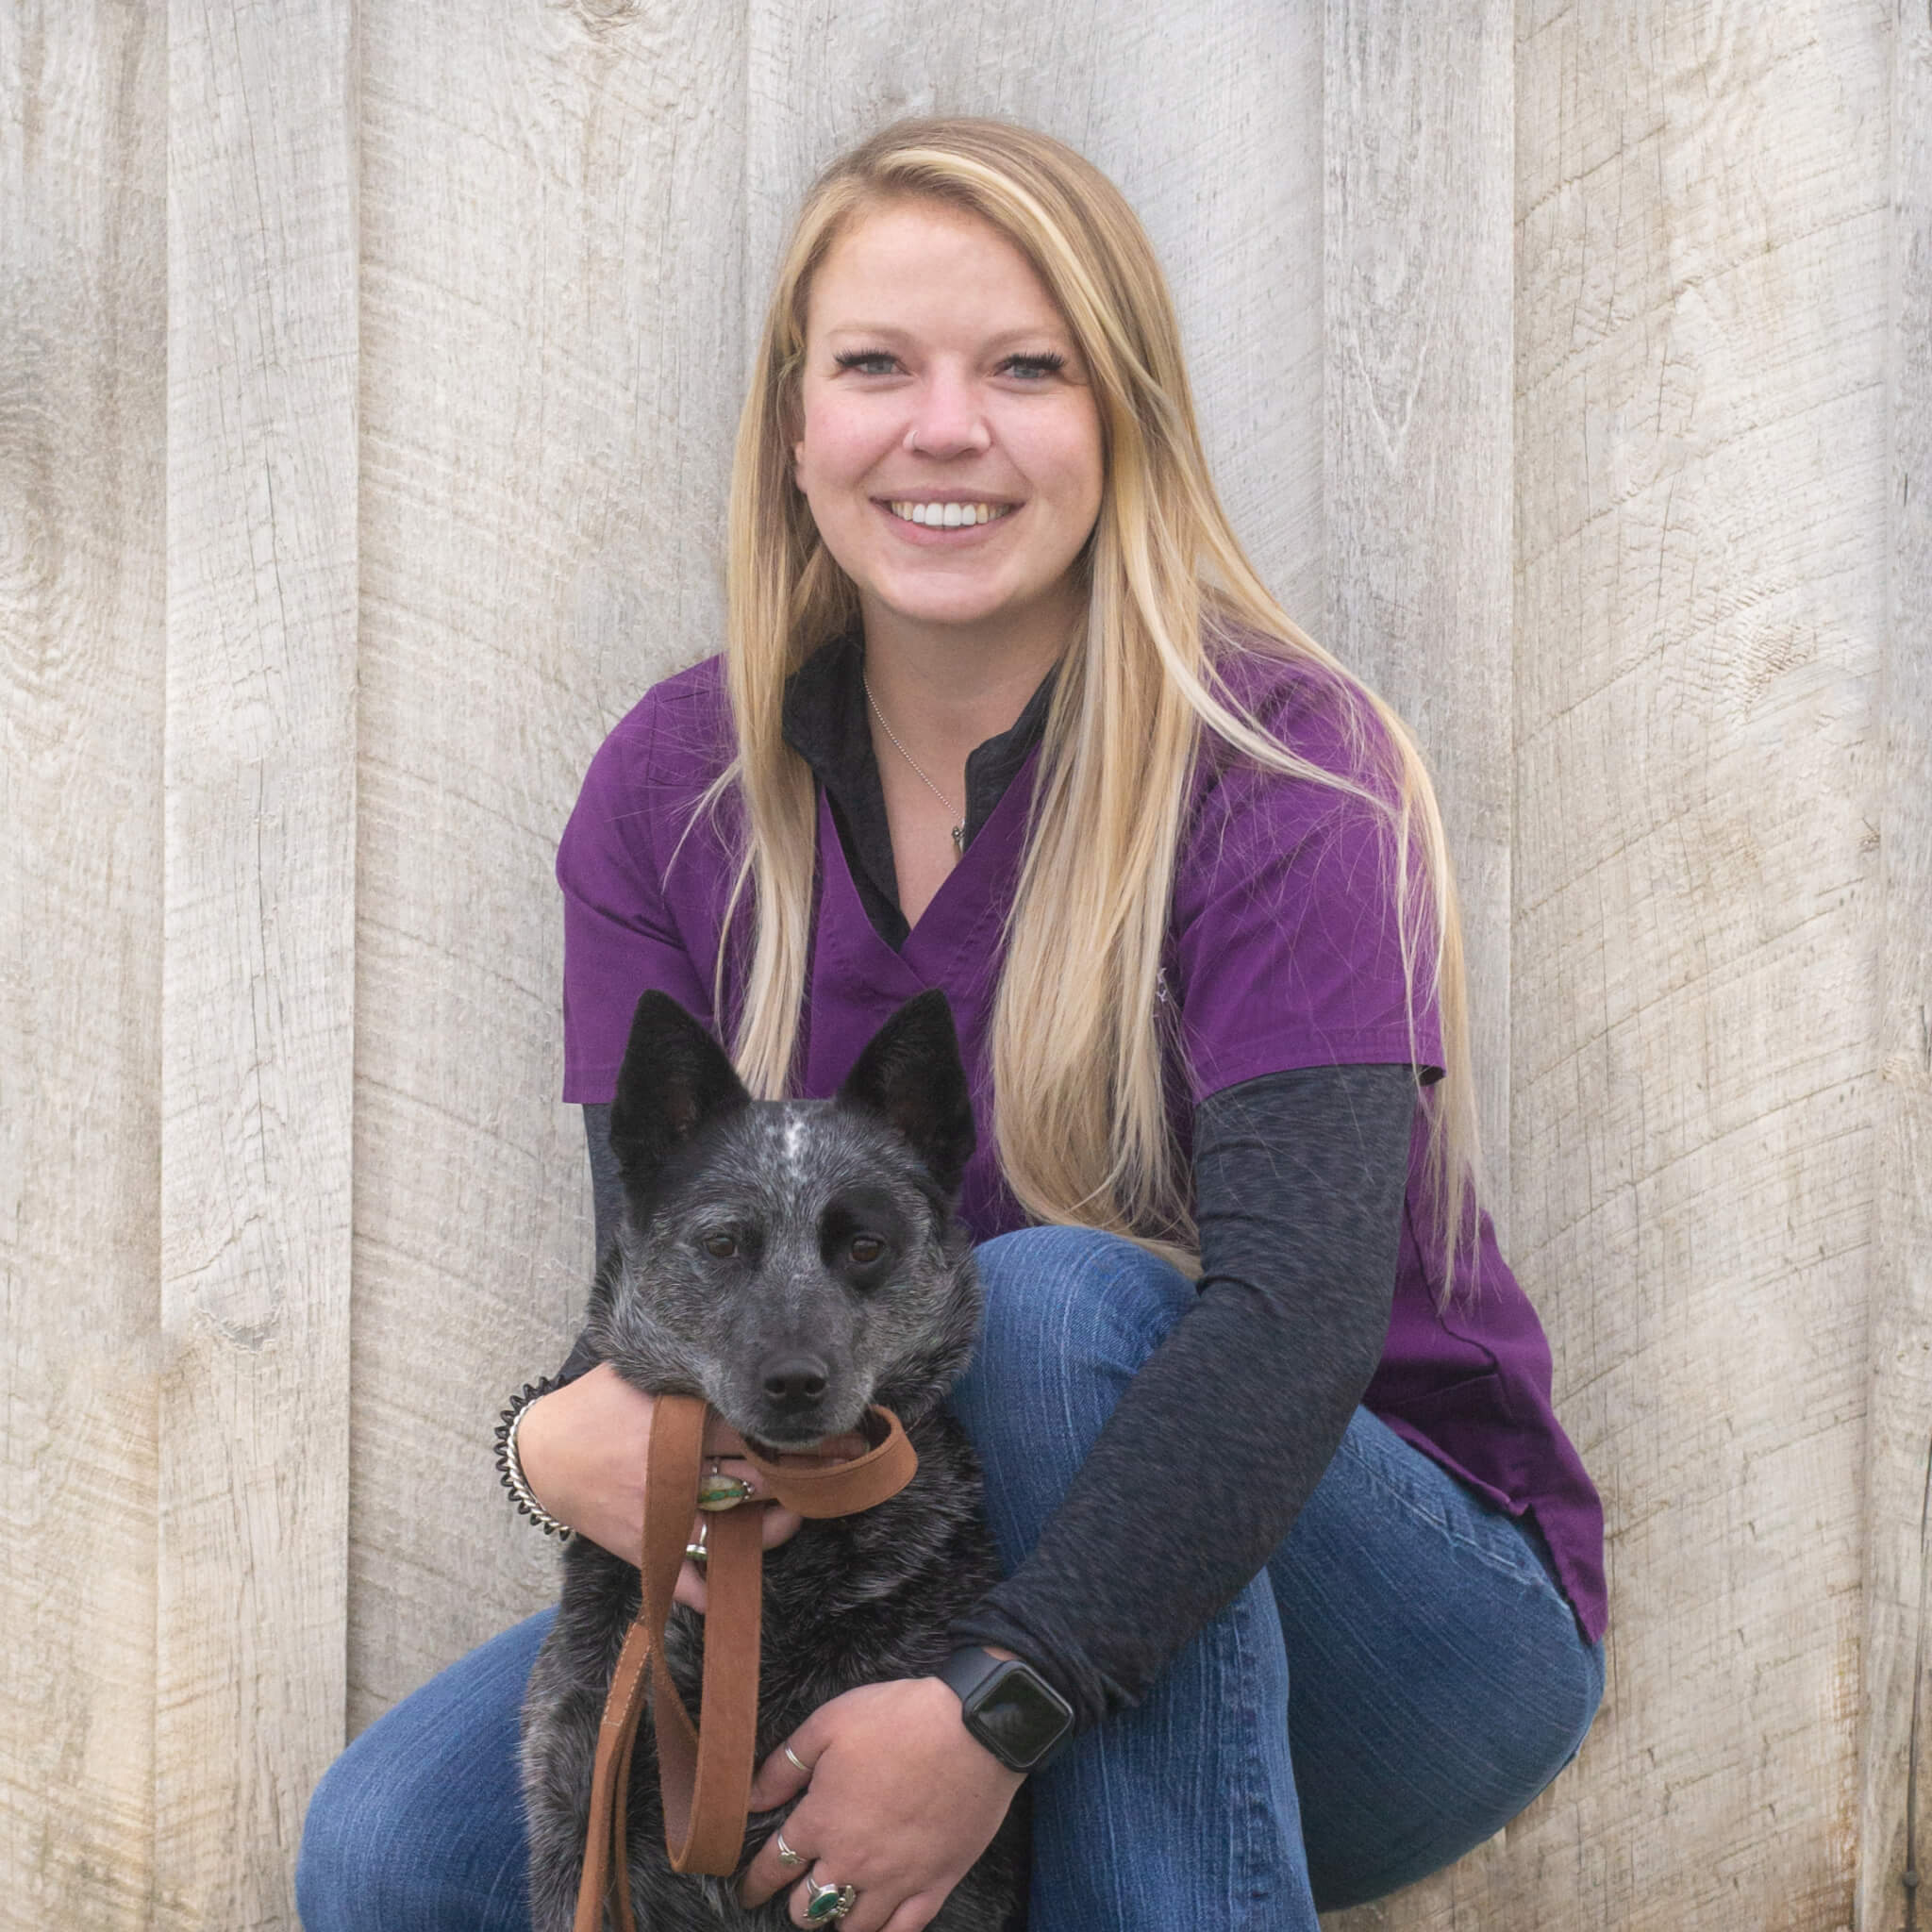 Veterinary assistant, Morgan, kneels down with a dog in Bozeman